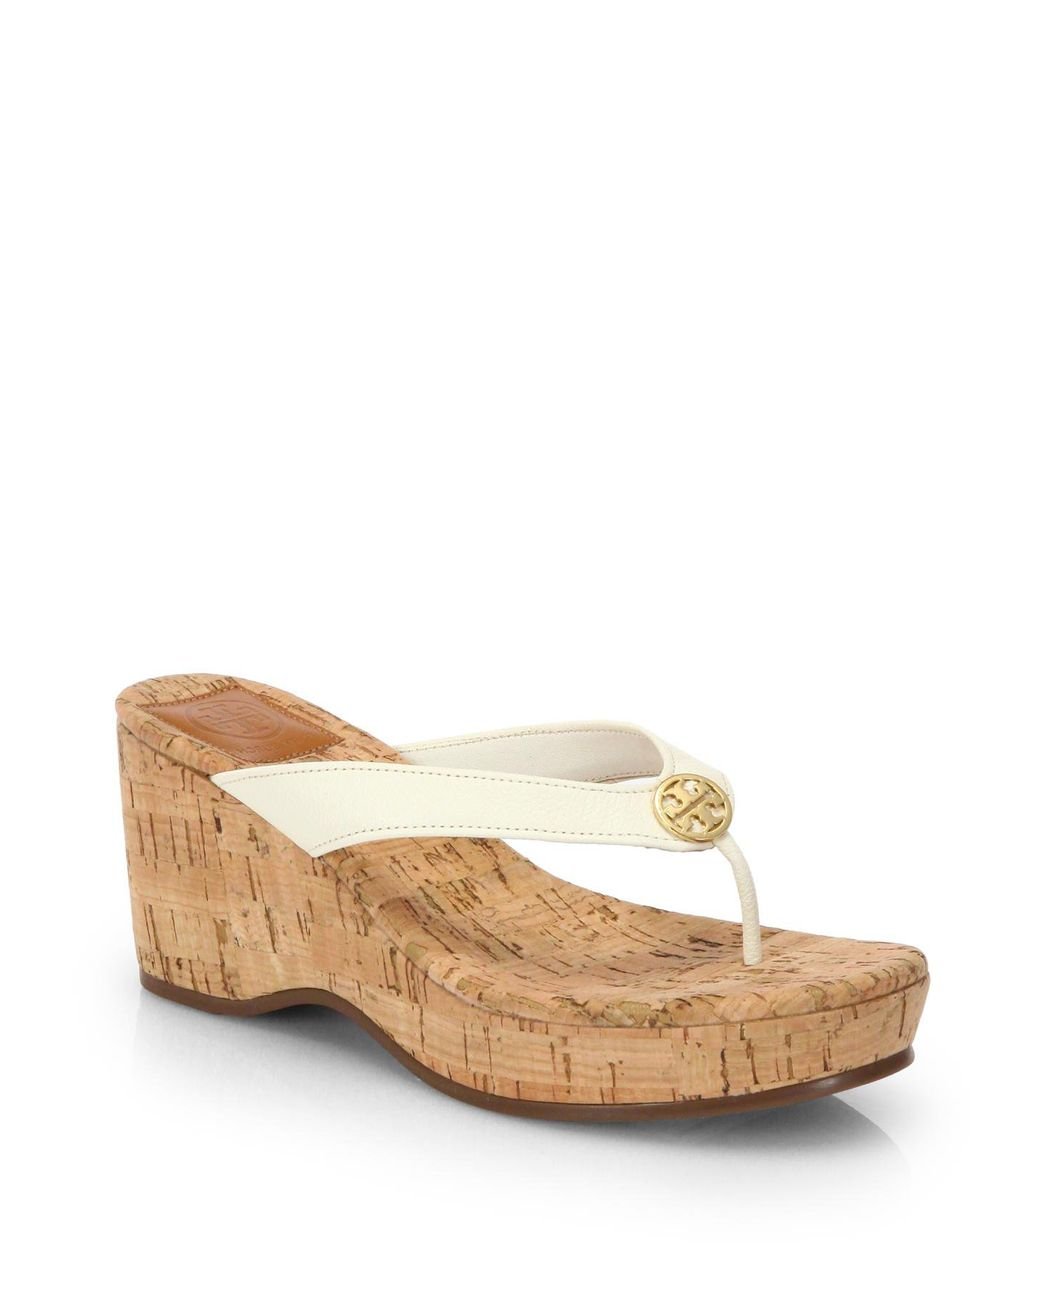 Tory Burch Suzy Leather Cork Wedge Sandals in White | Lyst